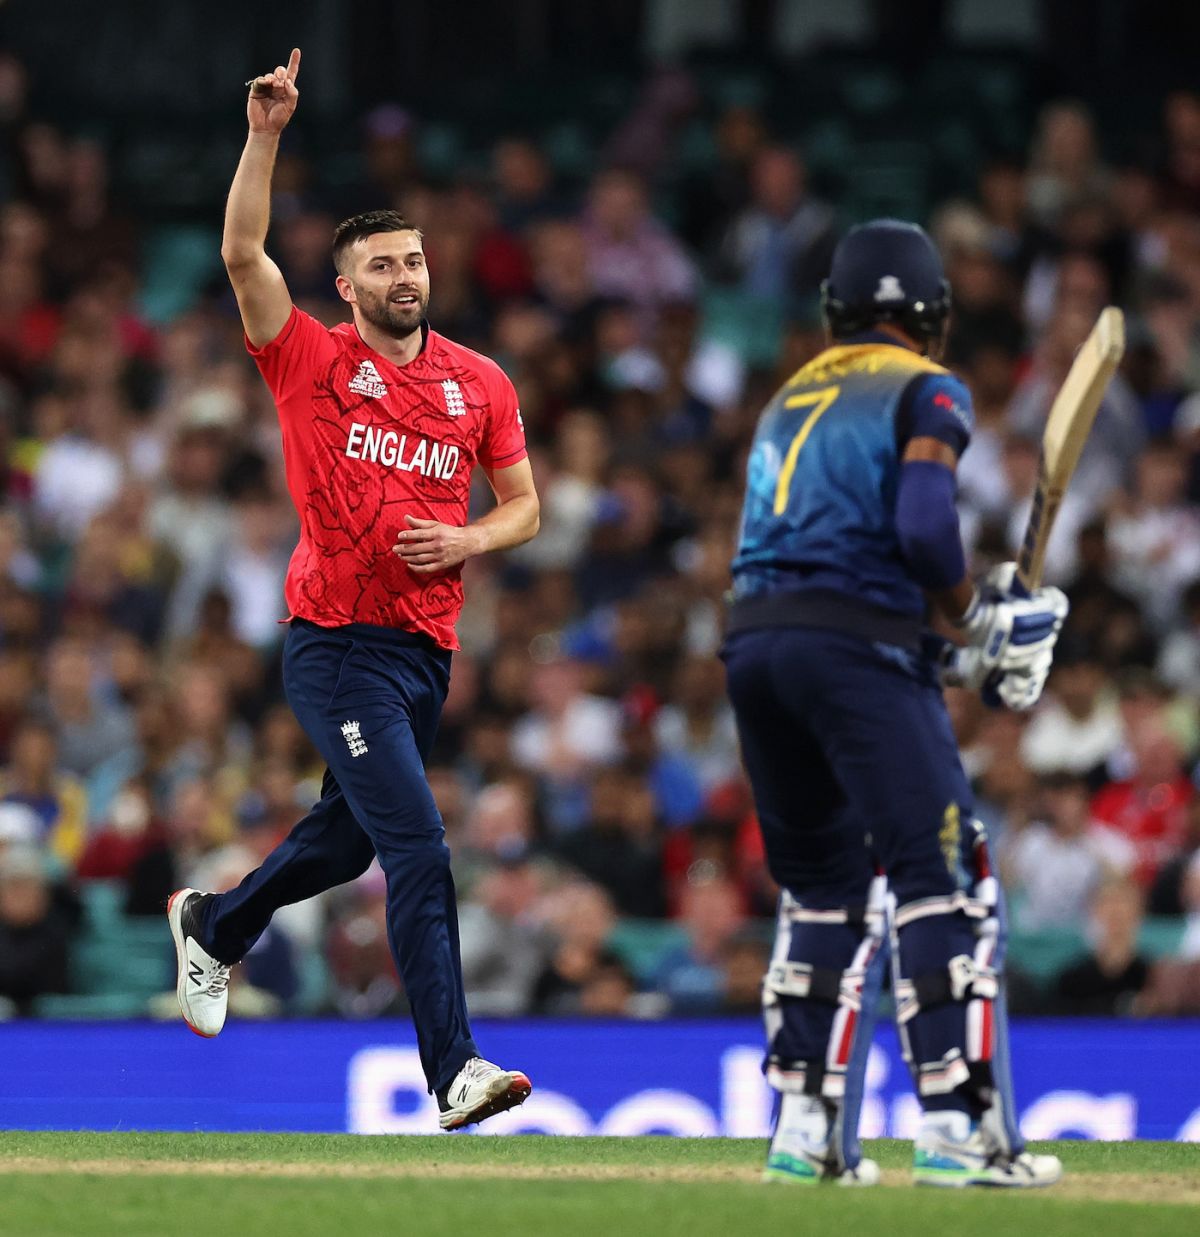 Mark Wood was outstanding after going for plenty in his first over, England vs Sri Lanka, T20 World Cup, Sydney, November 5, 2022